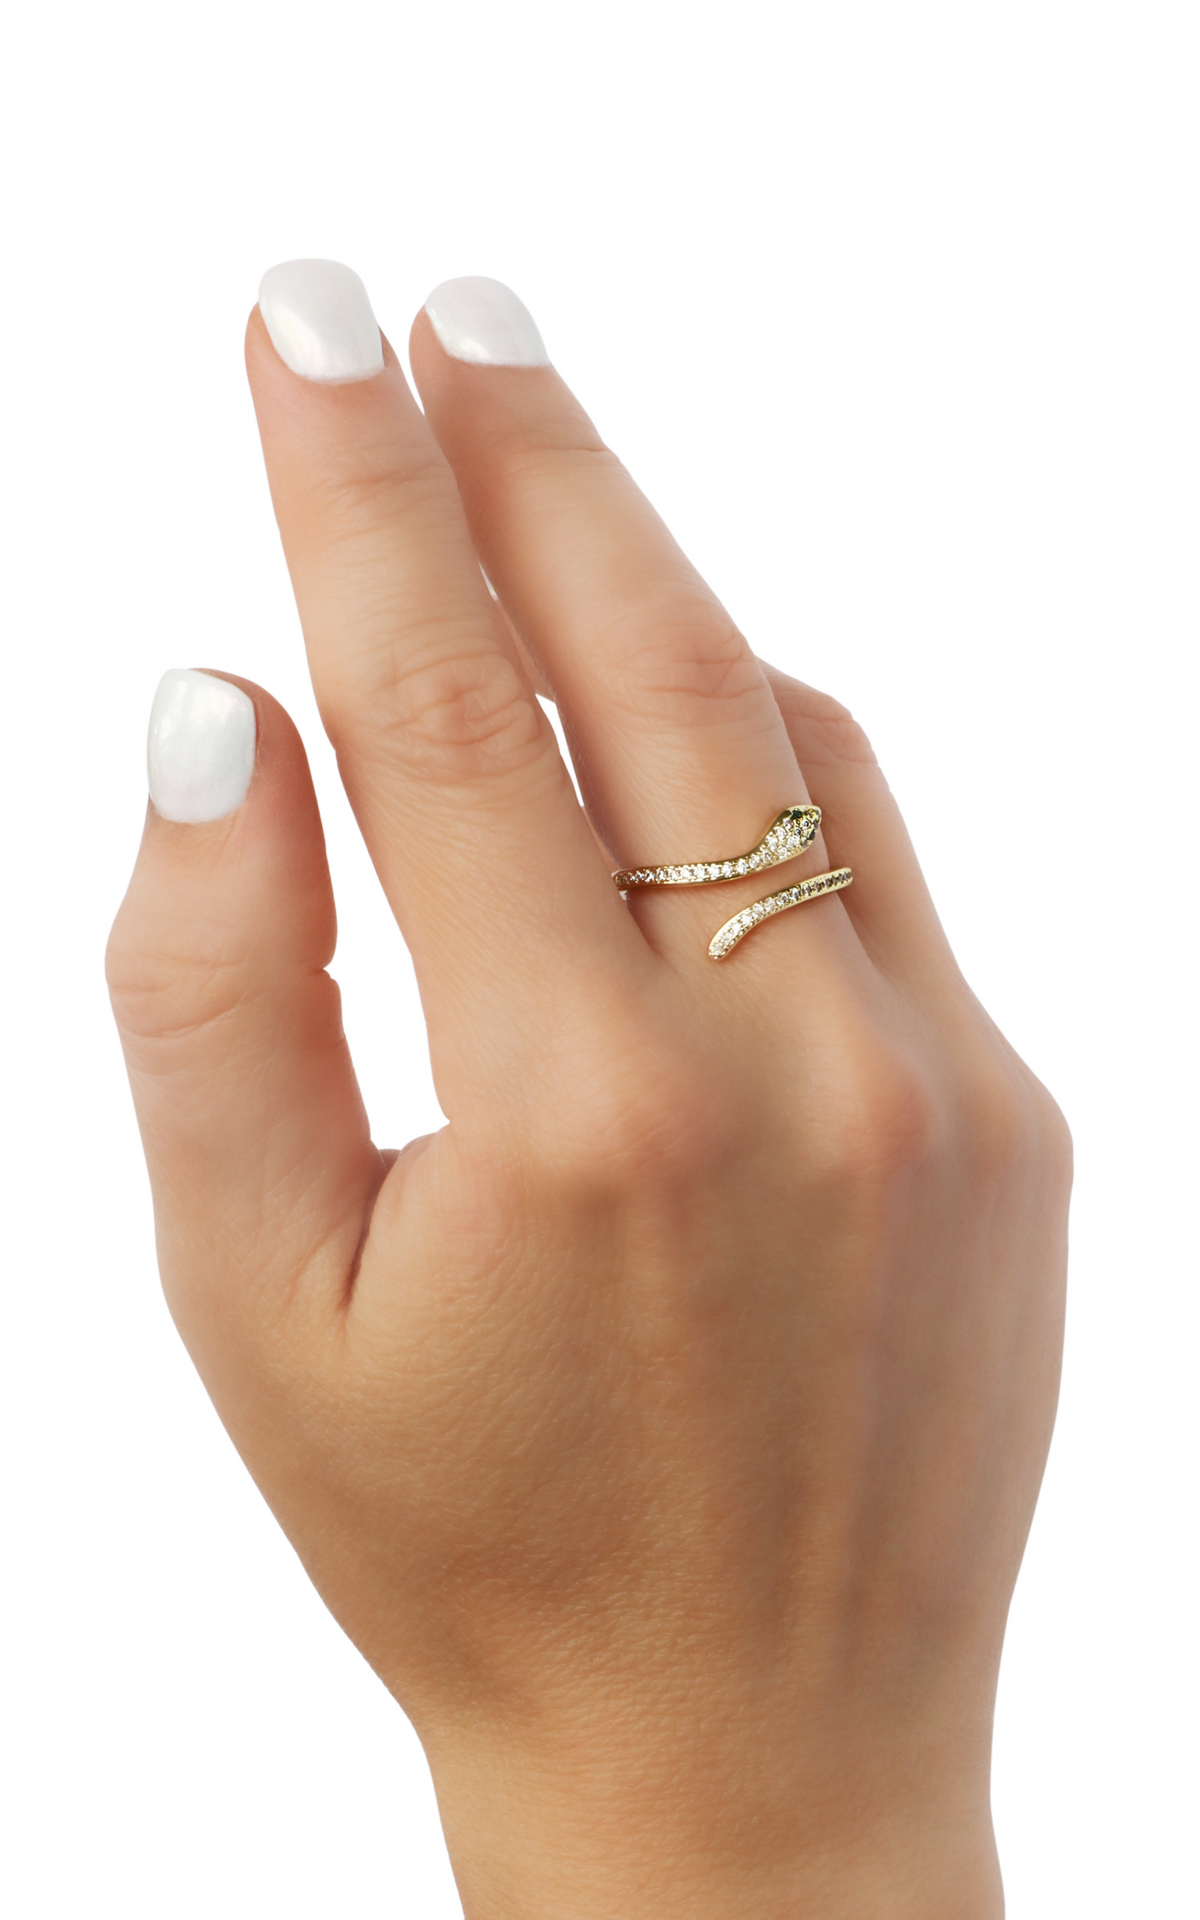 Jeweled Coiled Snake Ring